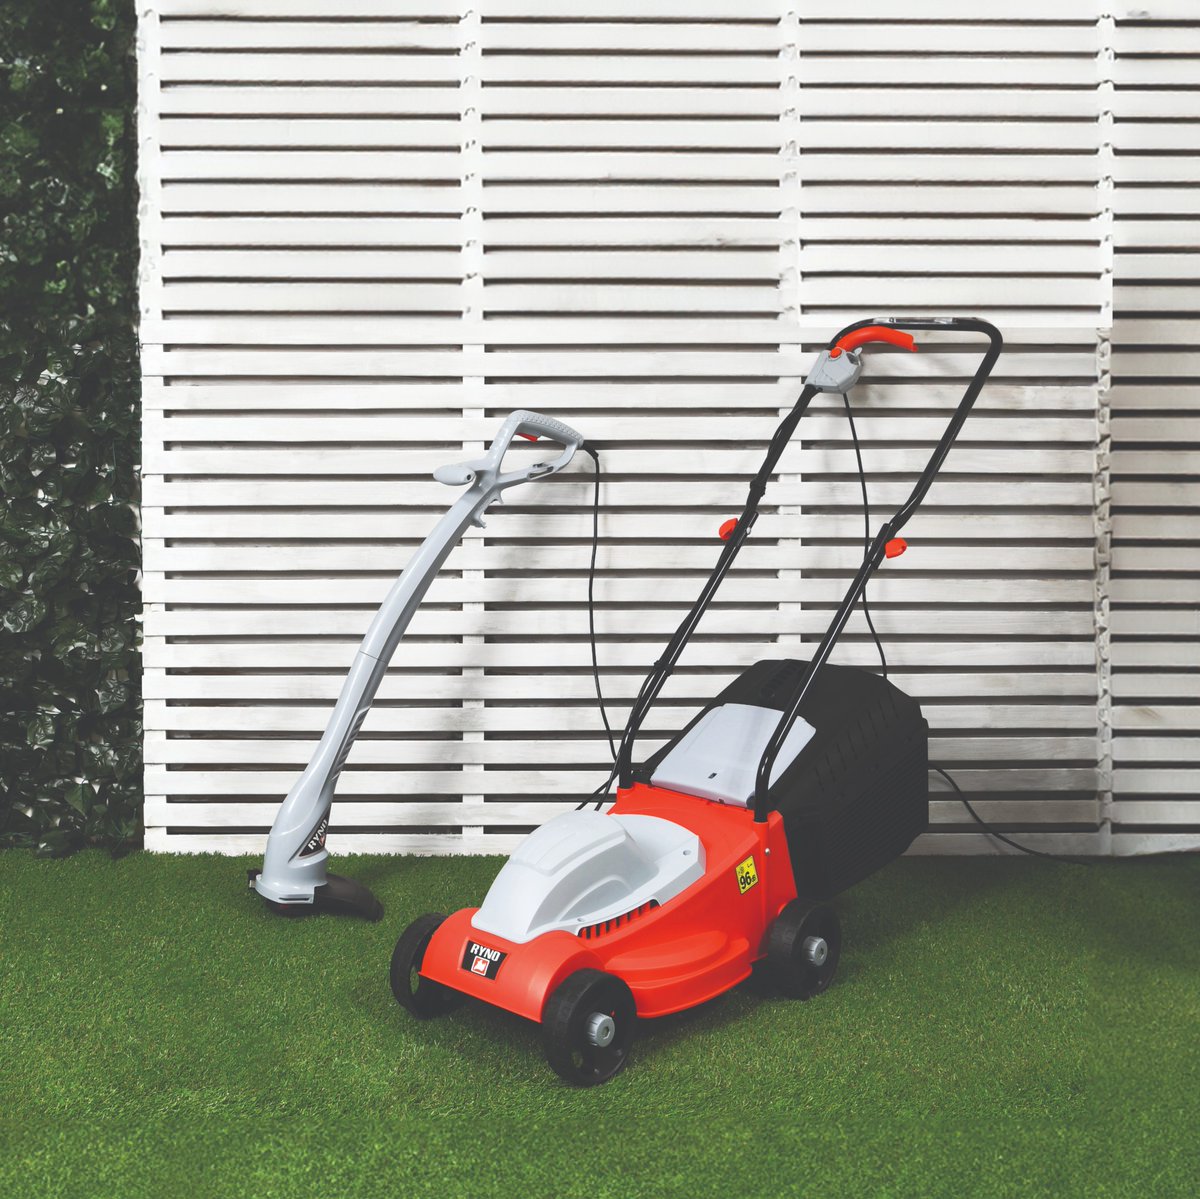 ☀️ BANK HOLIDAY OFFERS ☀️ 😍👉 Shop today & SAVE 25% OFF this Electric Mower and Trimmer Set, NOW LESS THAN £60! 🛒 BE QUICK TO SHOP! bit.ly/3QshLrJ